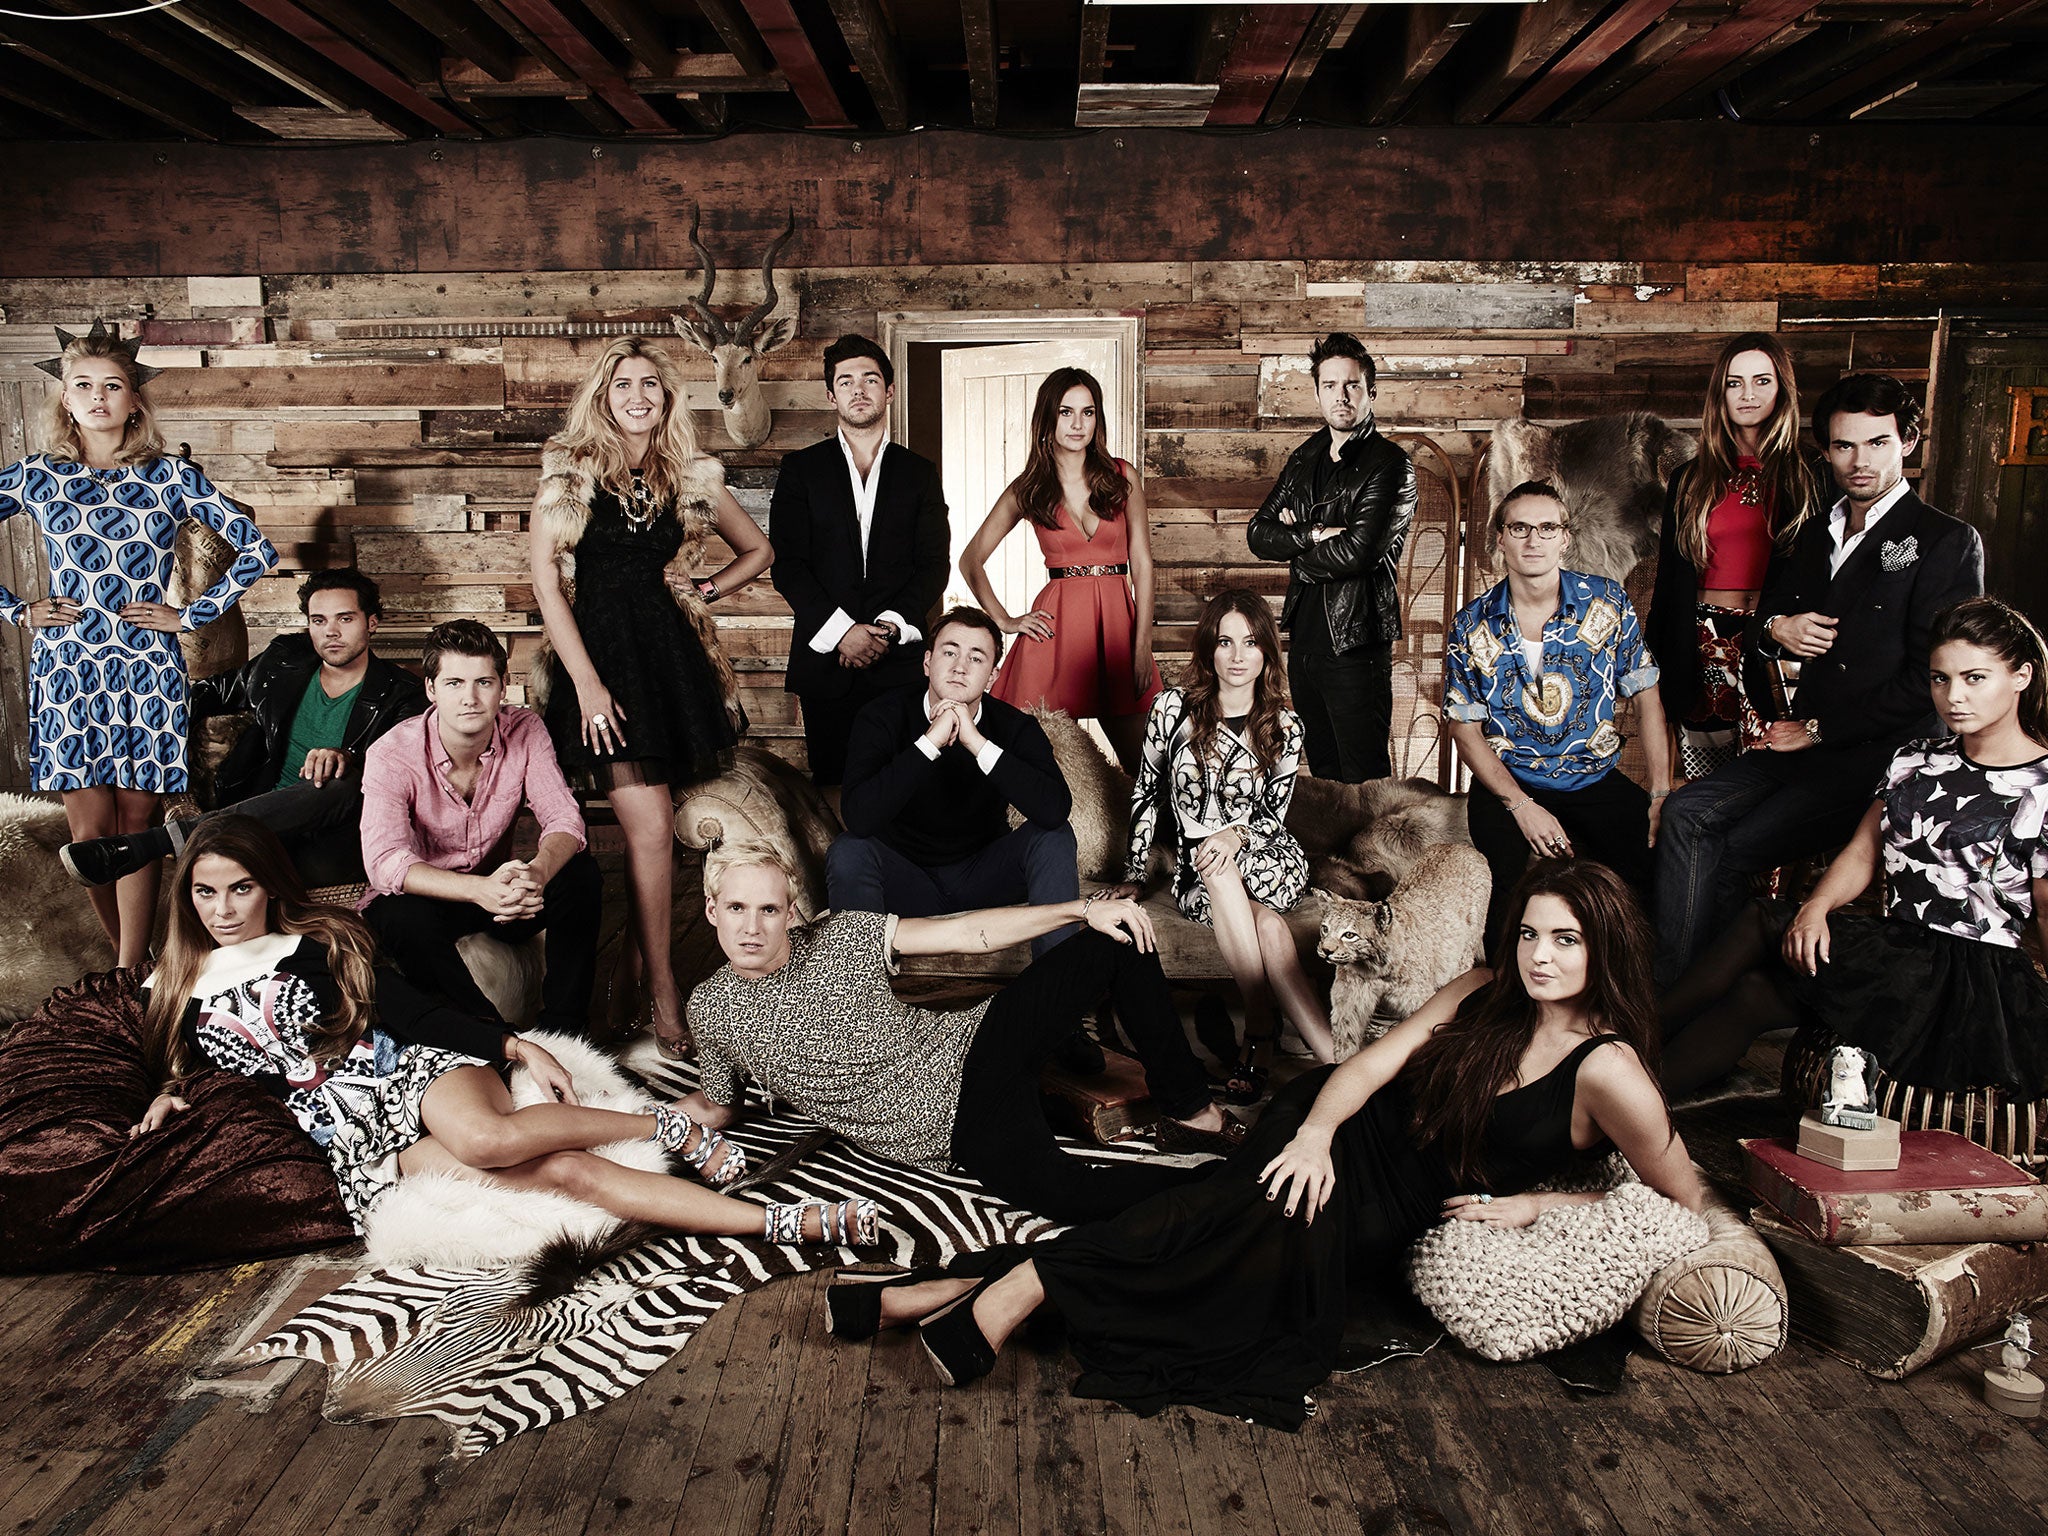 Look who's back, back again: Made in Chelsea season 7 starts on E4 on Monday 7 April